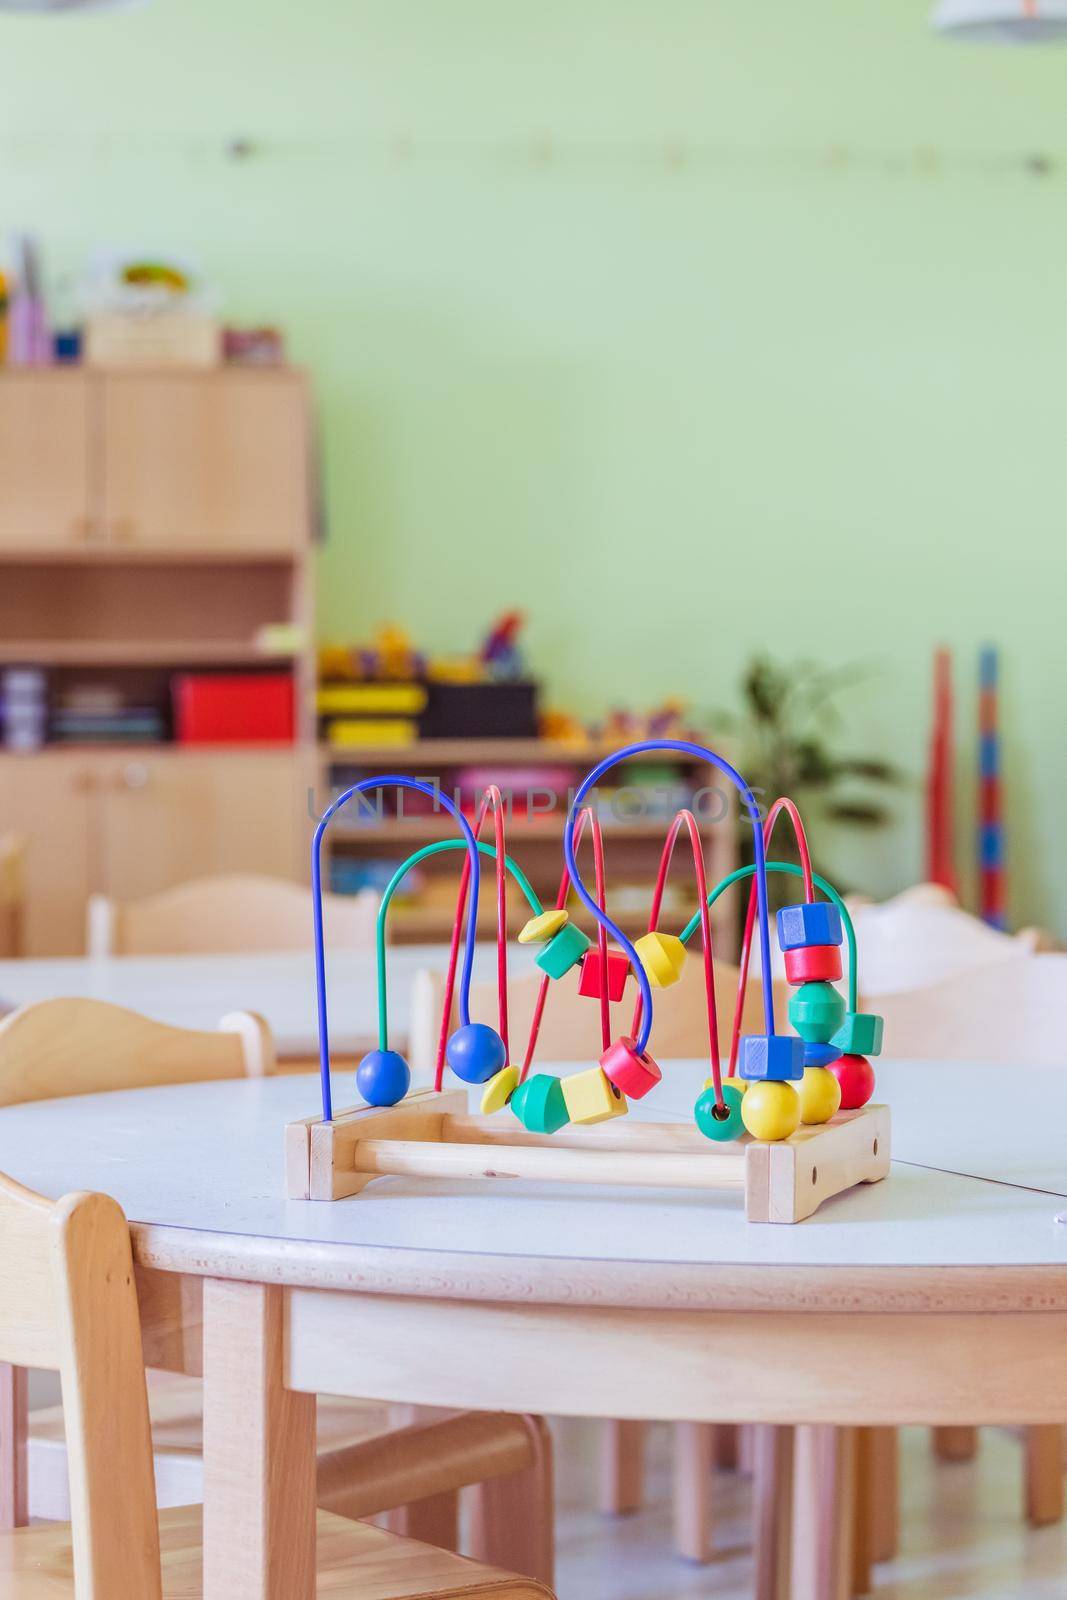 Close up of colorful wooden toy for learning and socialization